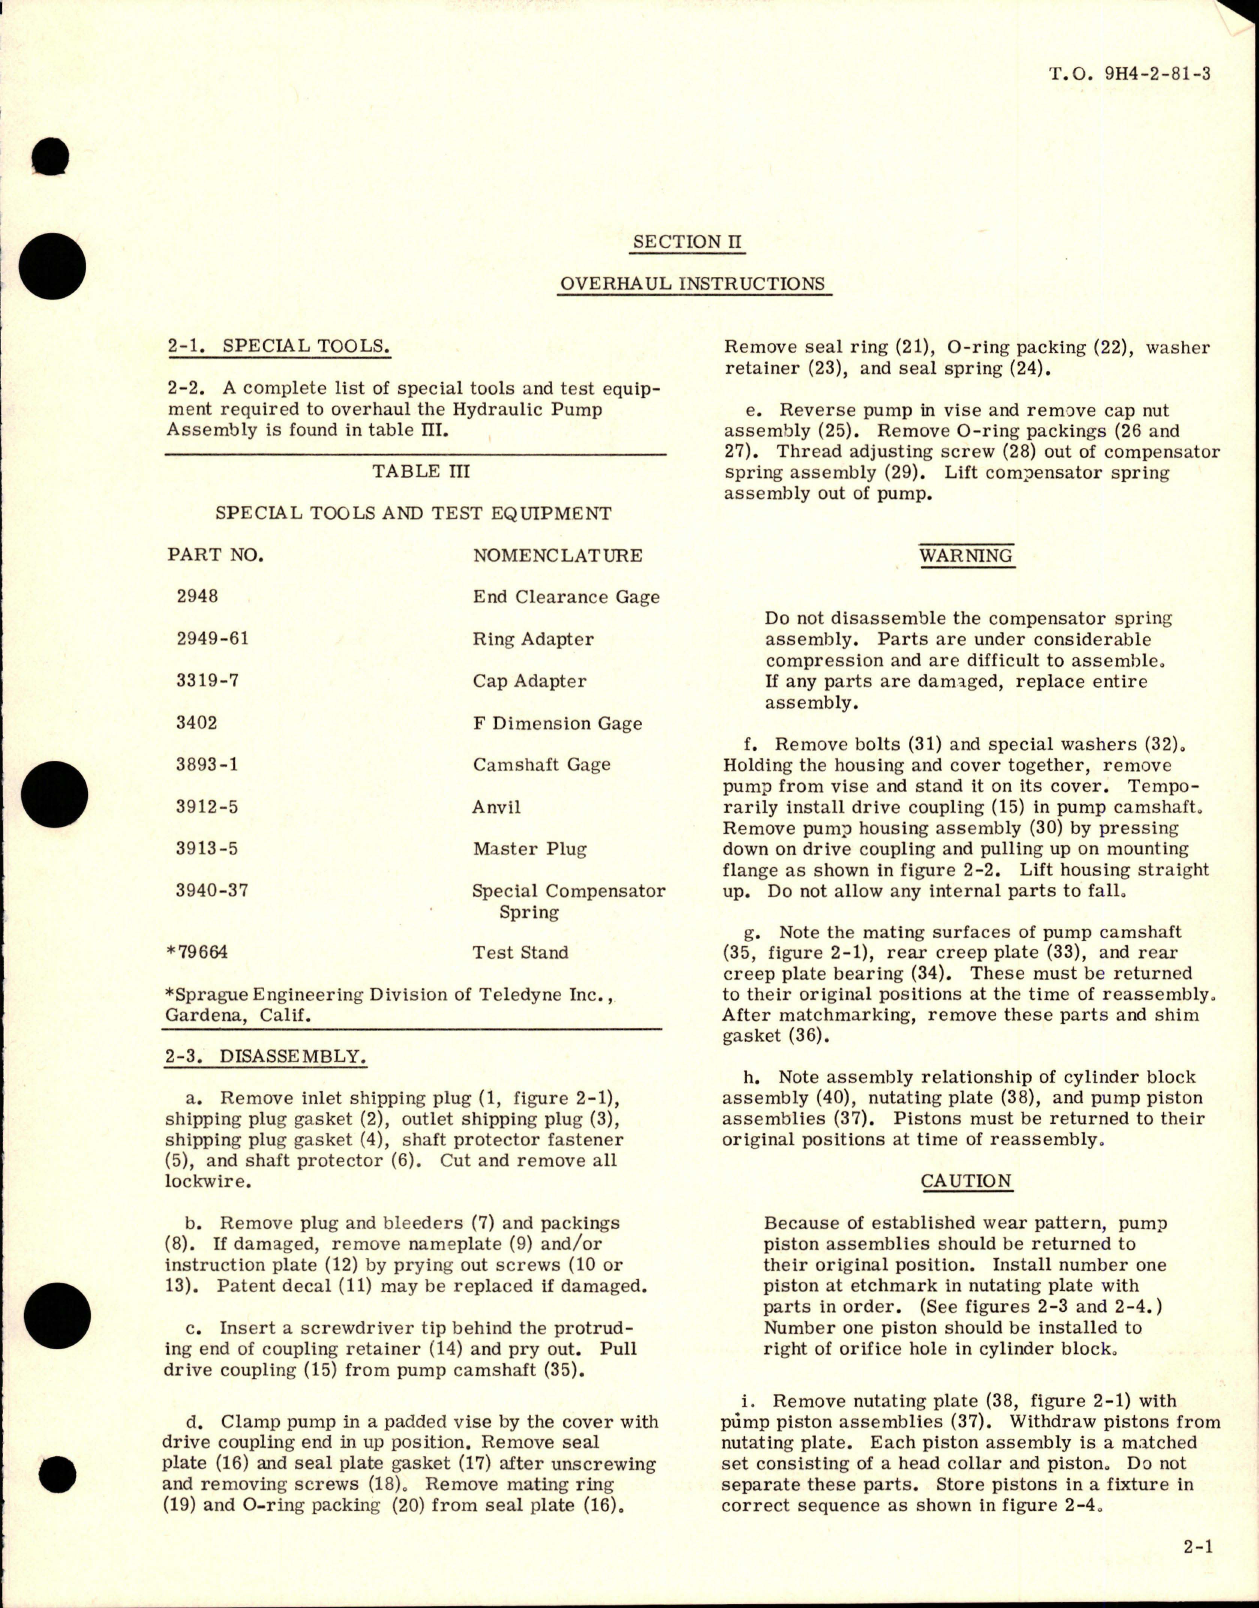 Sample page 7 from AirCorps Library document: Overhaul Manual for Hydraulic Pump Assembly - Part 65WB02003